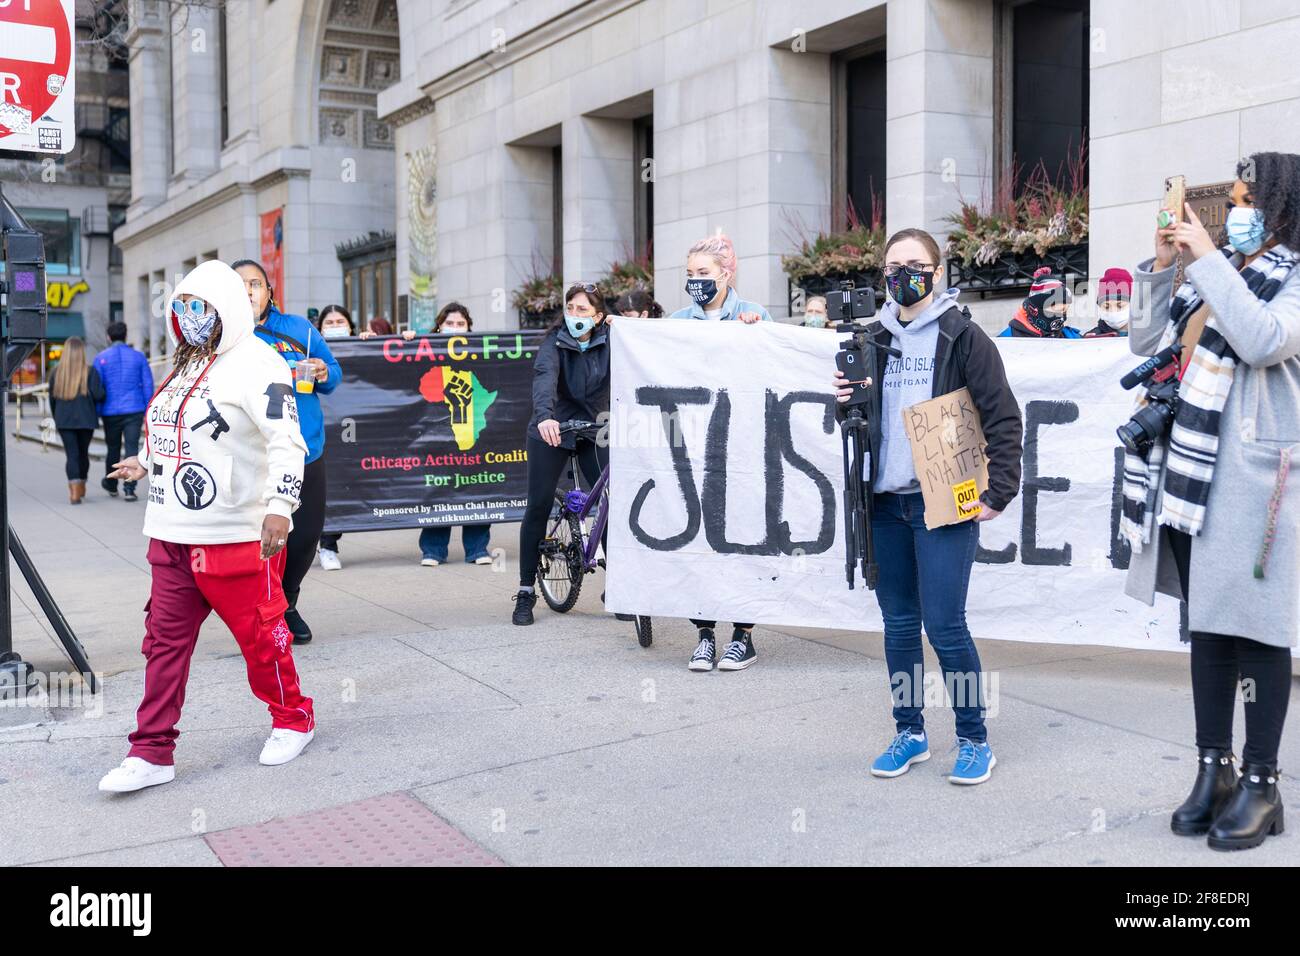 Chicago, Illinois - March 13, 2021: A Group of Peaceful Breonna Taylor Protesters Demand Justice in Downtown Chicago During the COVID-19 Pandemic. Stock Photo